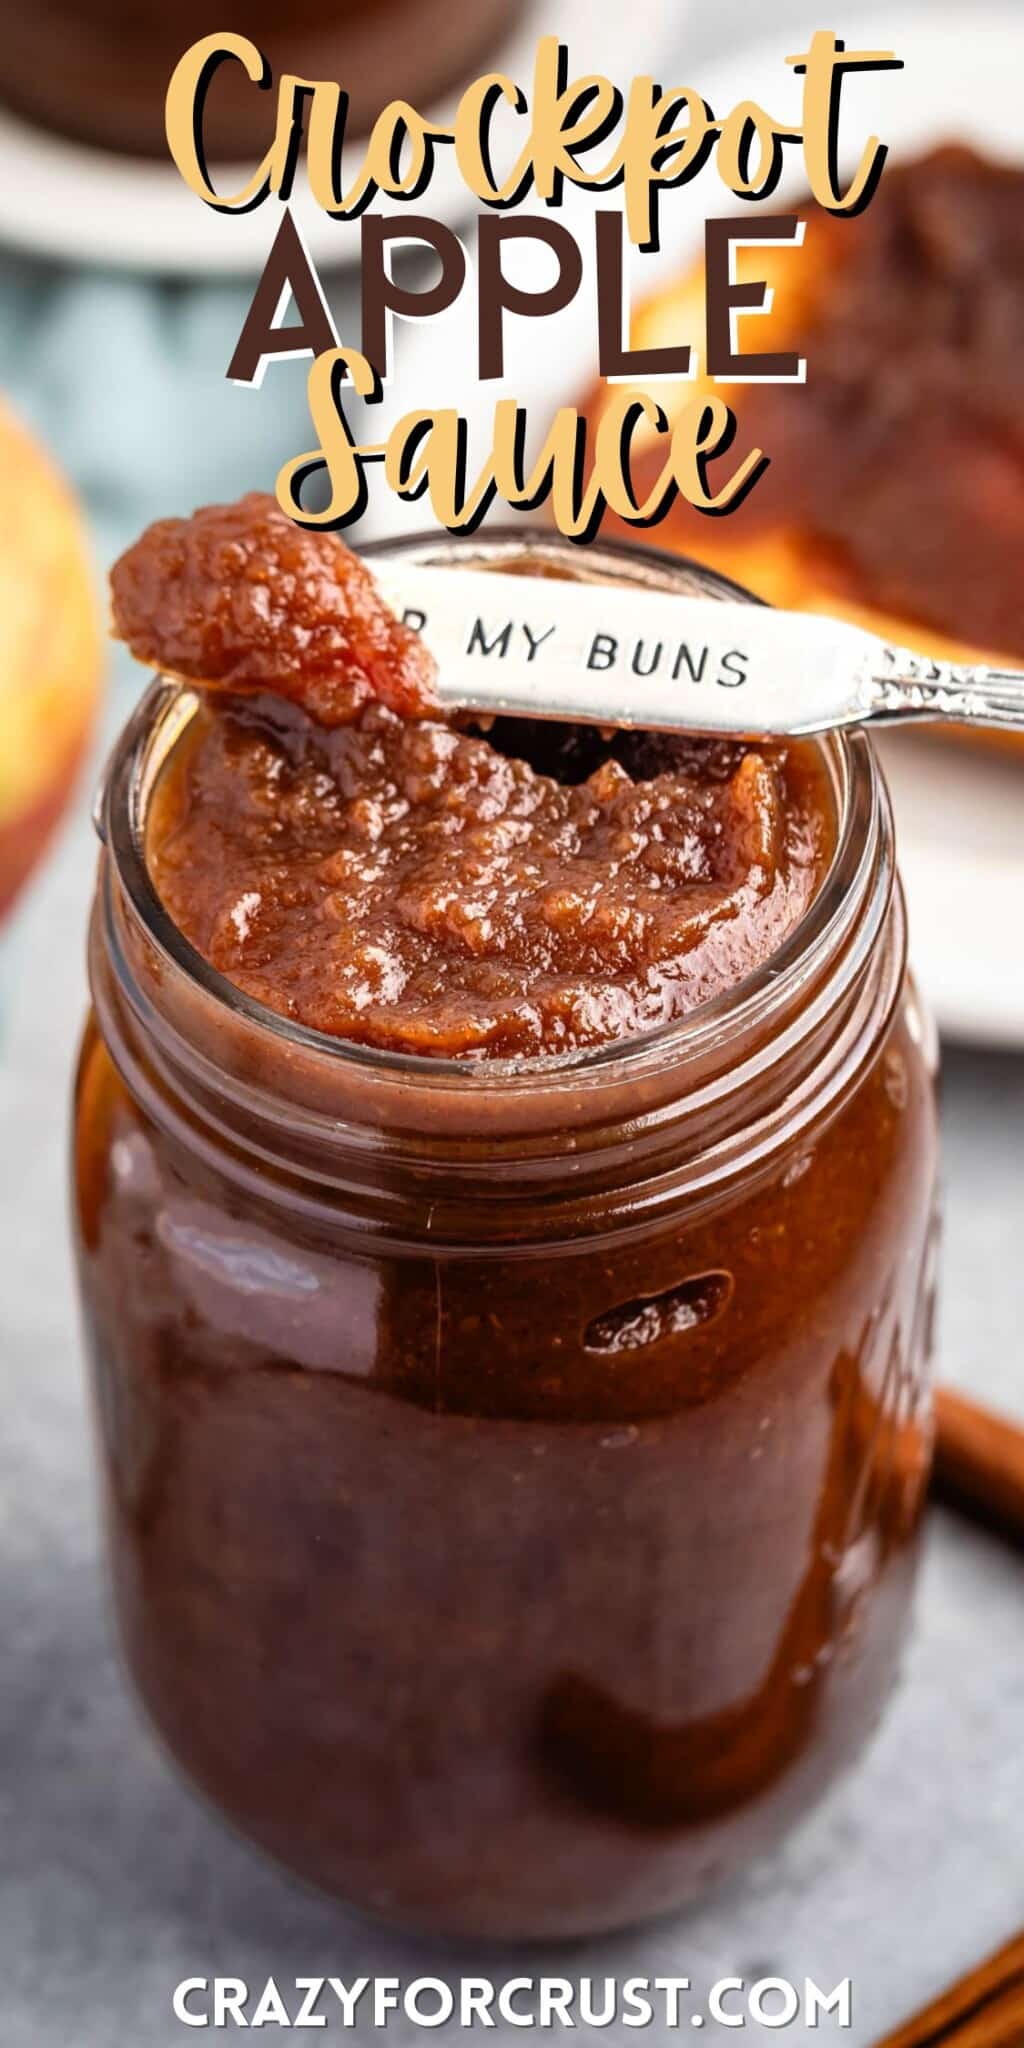 apple butter in a mason jar with a spoon scooping it with words on the image.